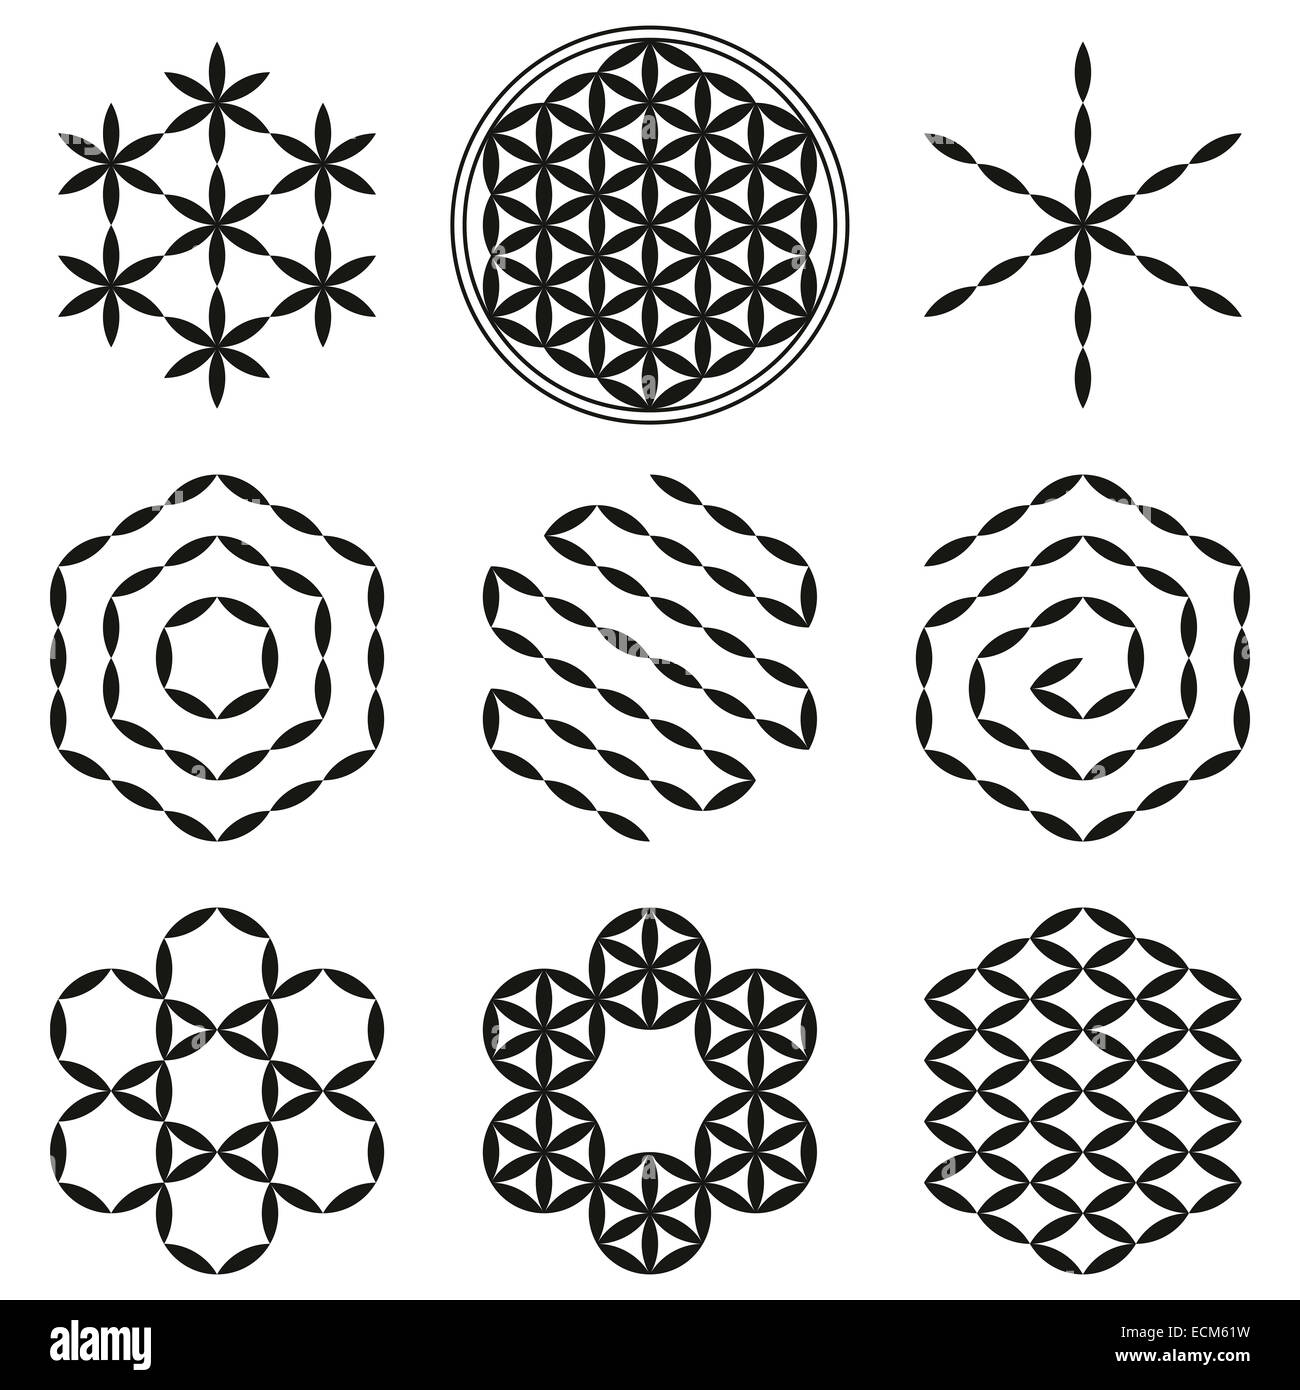 Eight extracted patterns from the Flower of Life, a spiritual symbol and Sacred Geometry since ancient times. Stock Photo